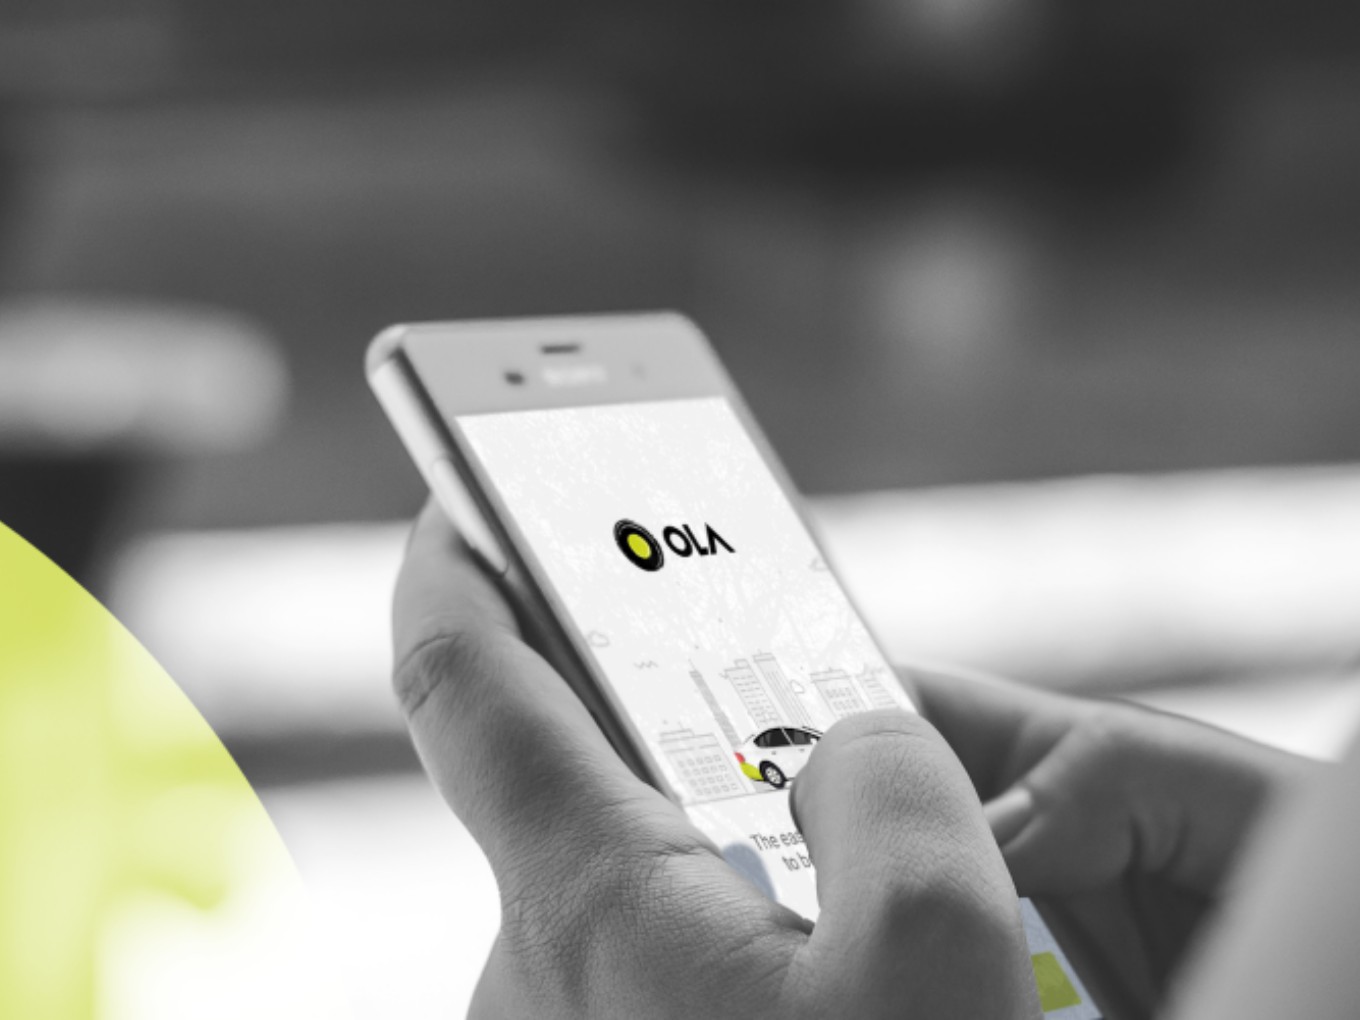 Ola Plans $500 Mn Boost For Its Self-Driving Service Ola Drive